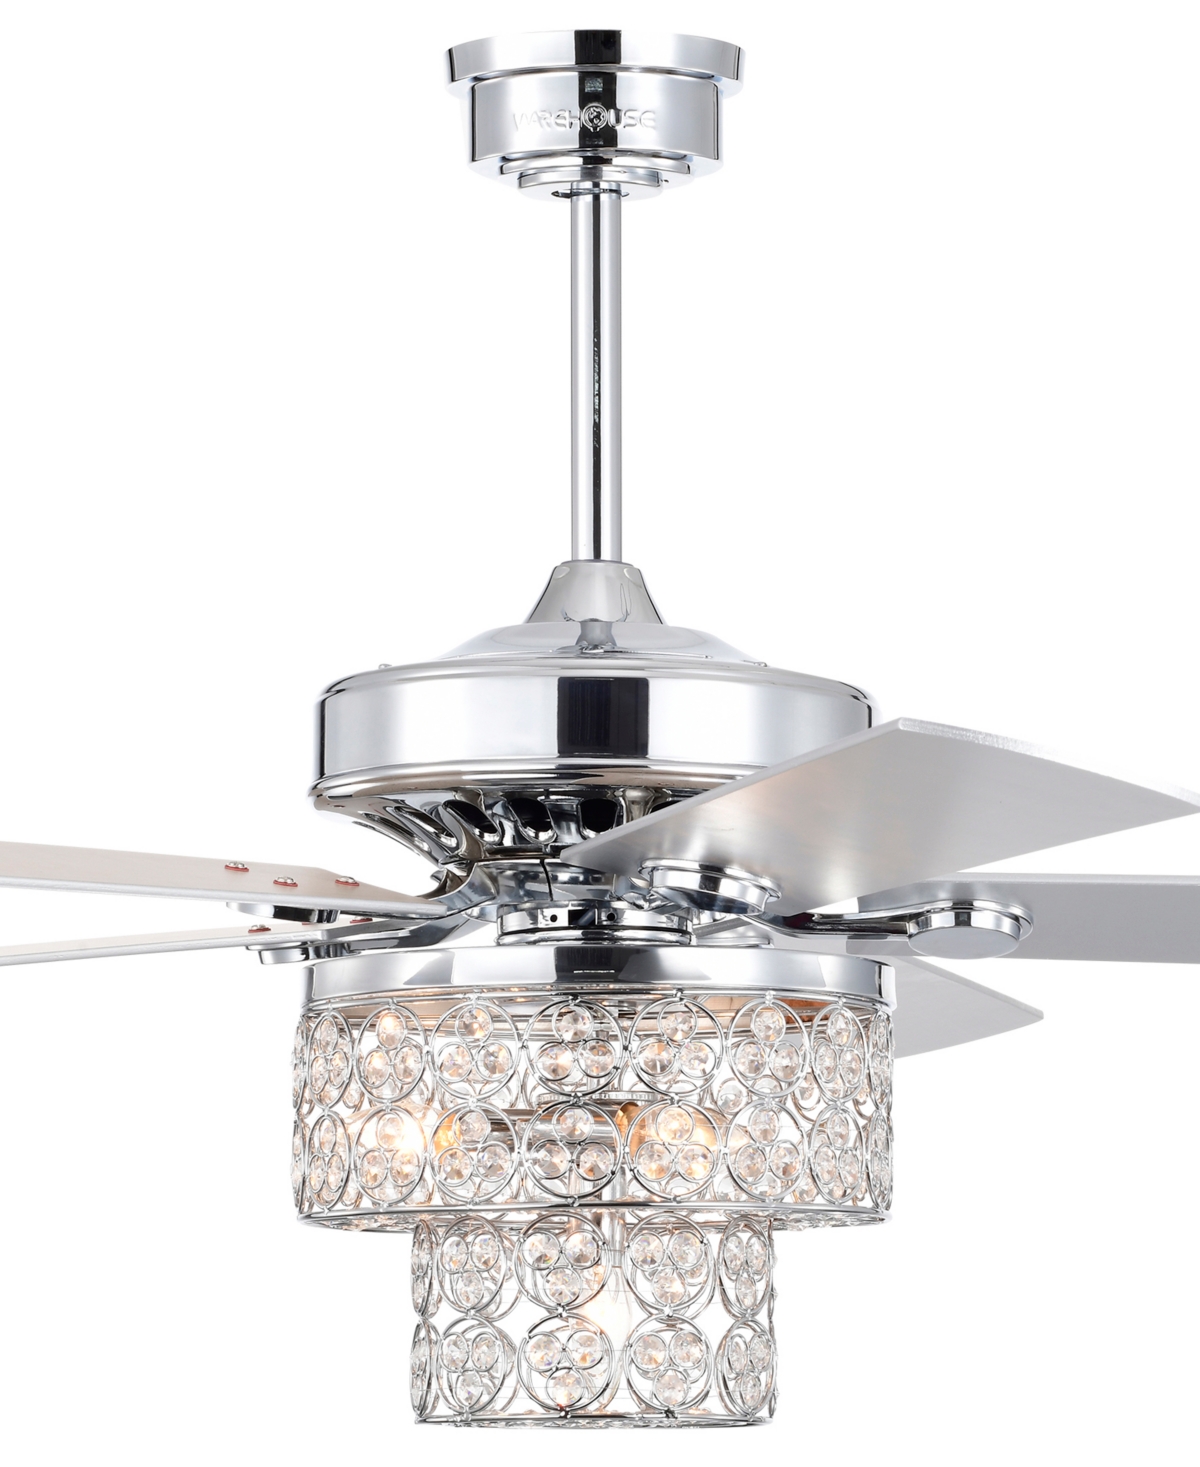 Home Accessories Caderina 52" 4-light Indoor Ceiling Fan With Light Kit And Remote In Chrome